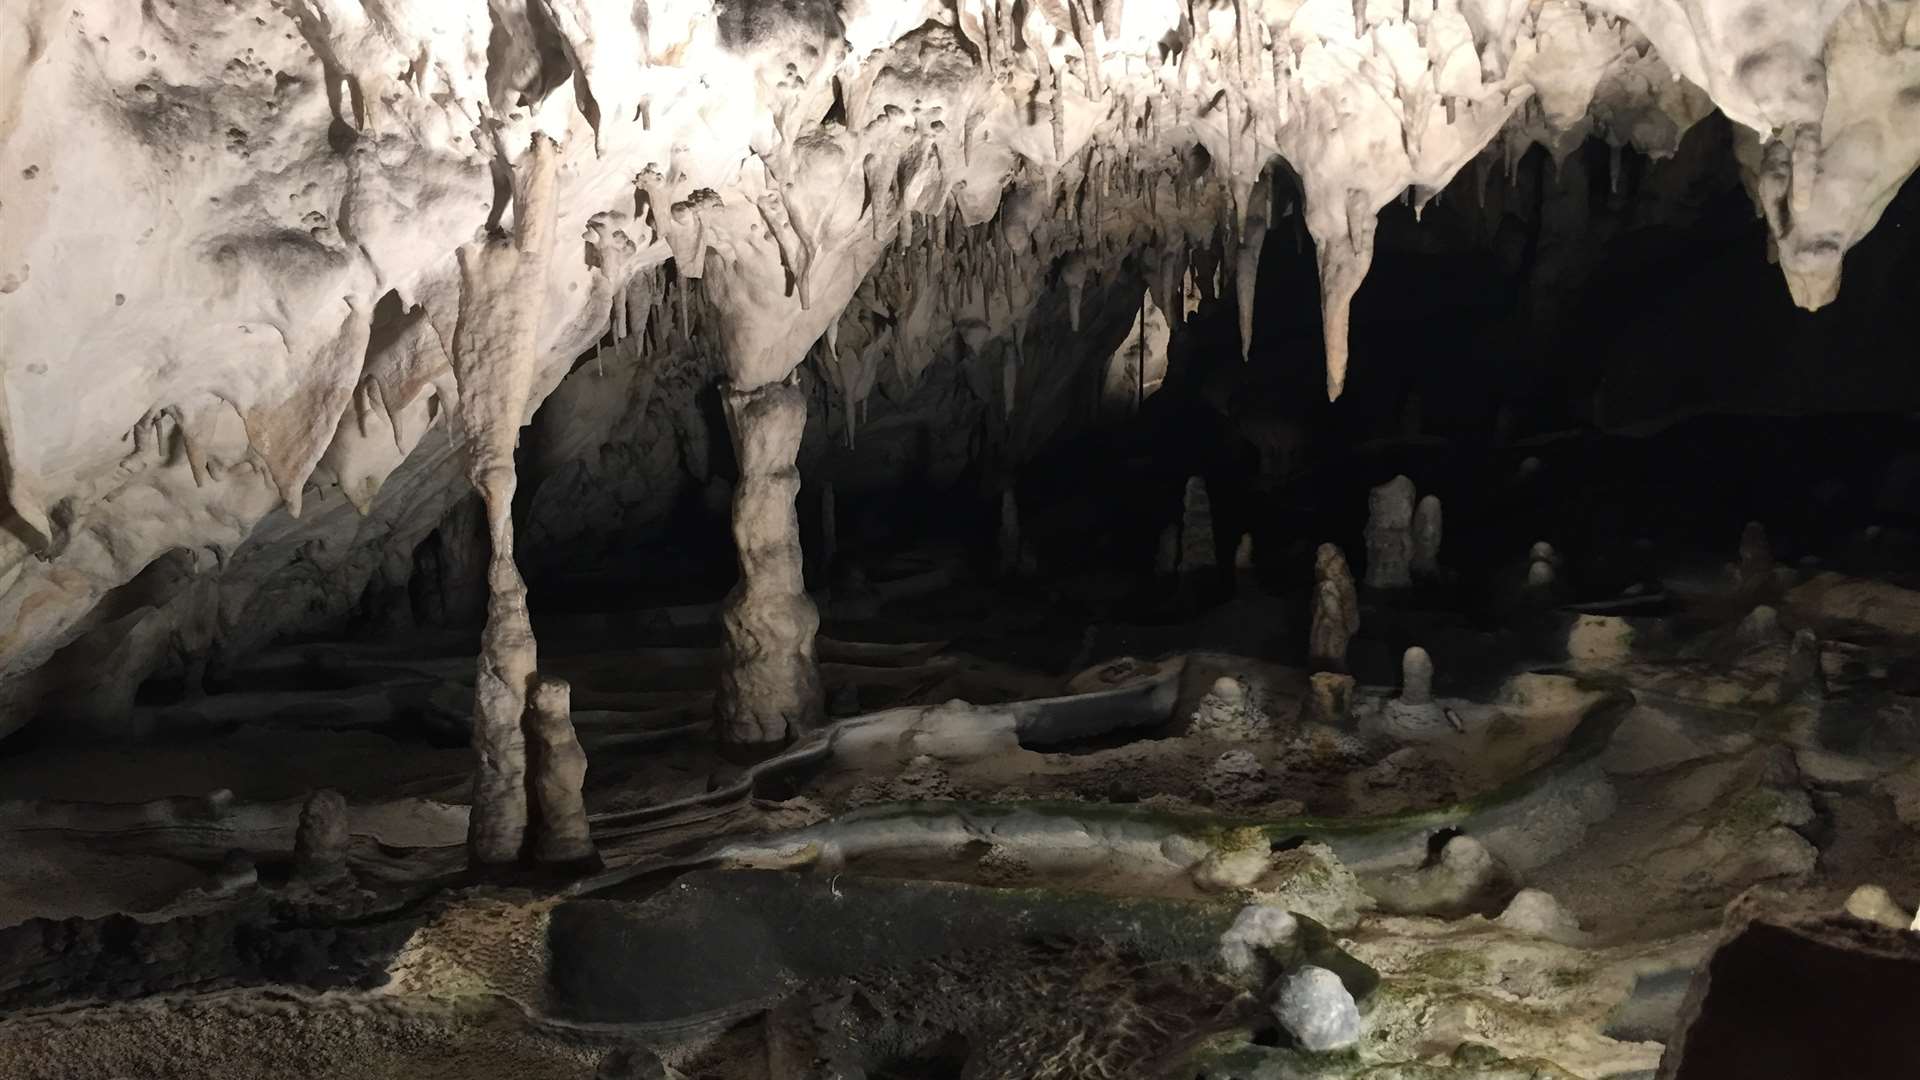 There are stalagmites and stalactites at every corner